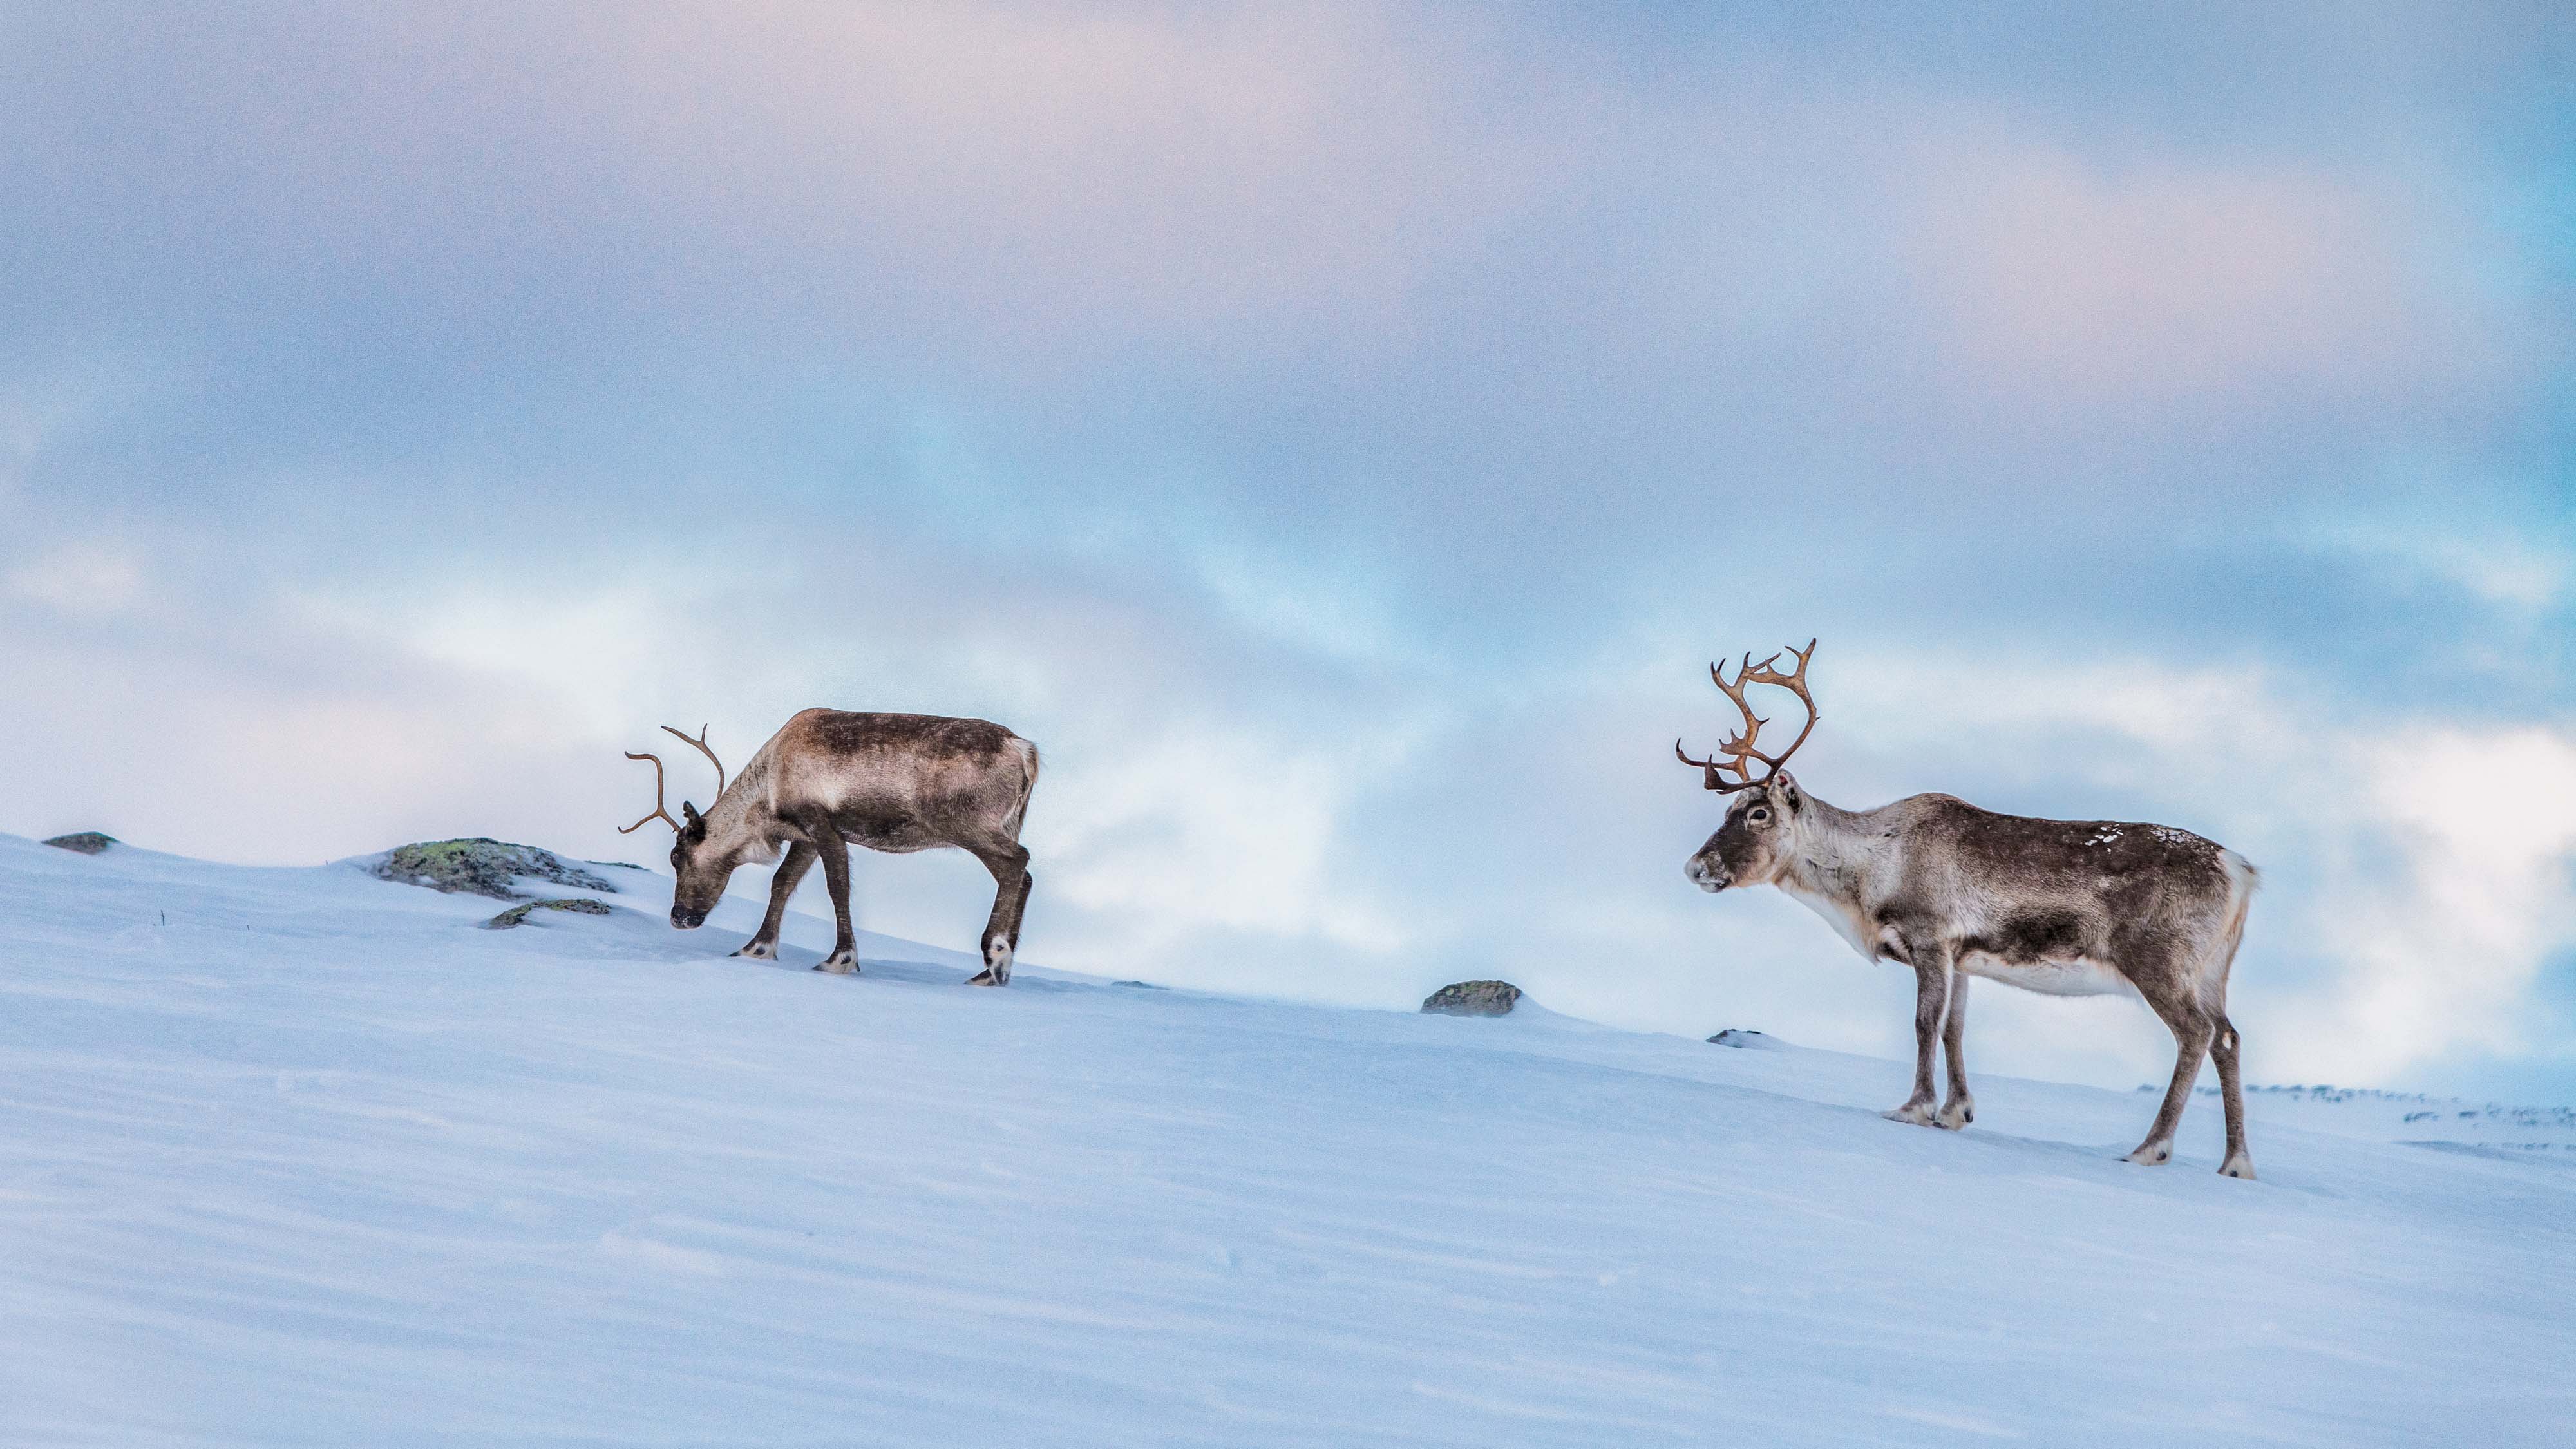 Two reindeer on a fell looking for lichen underneath snow.